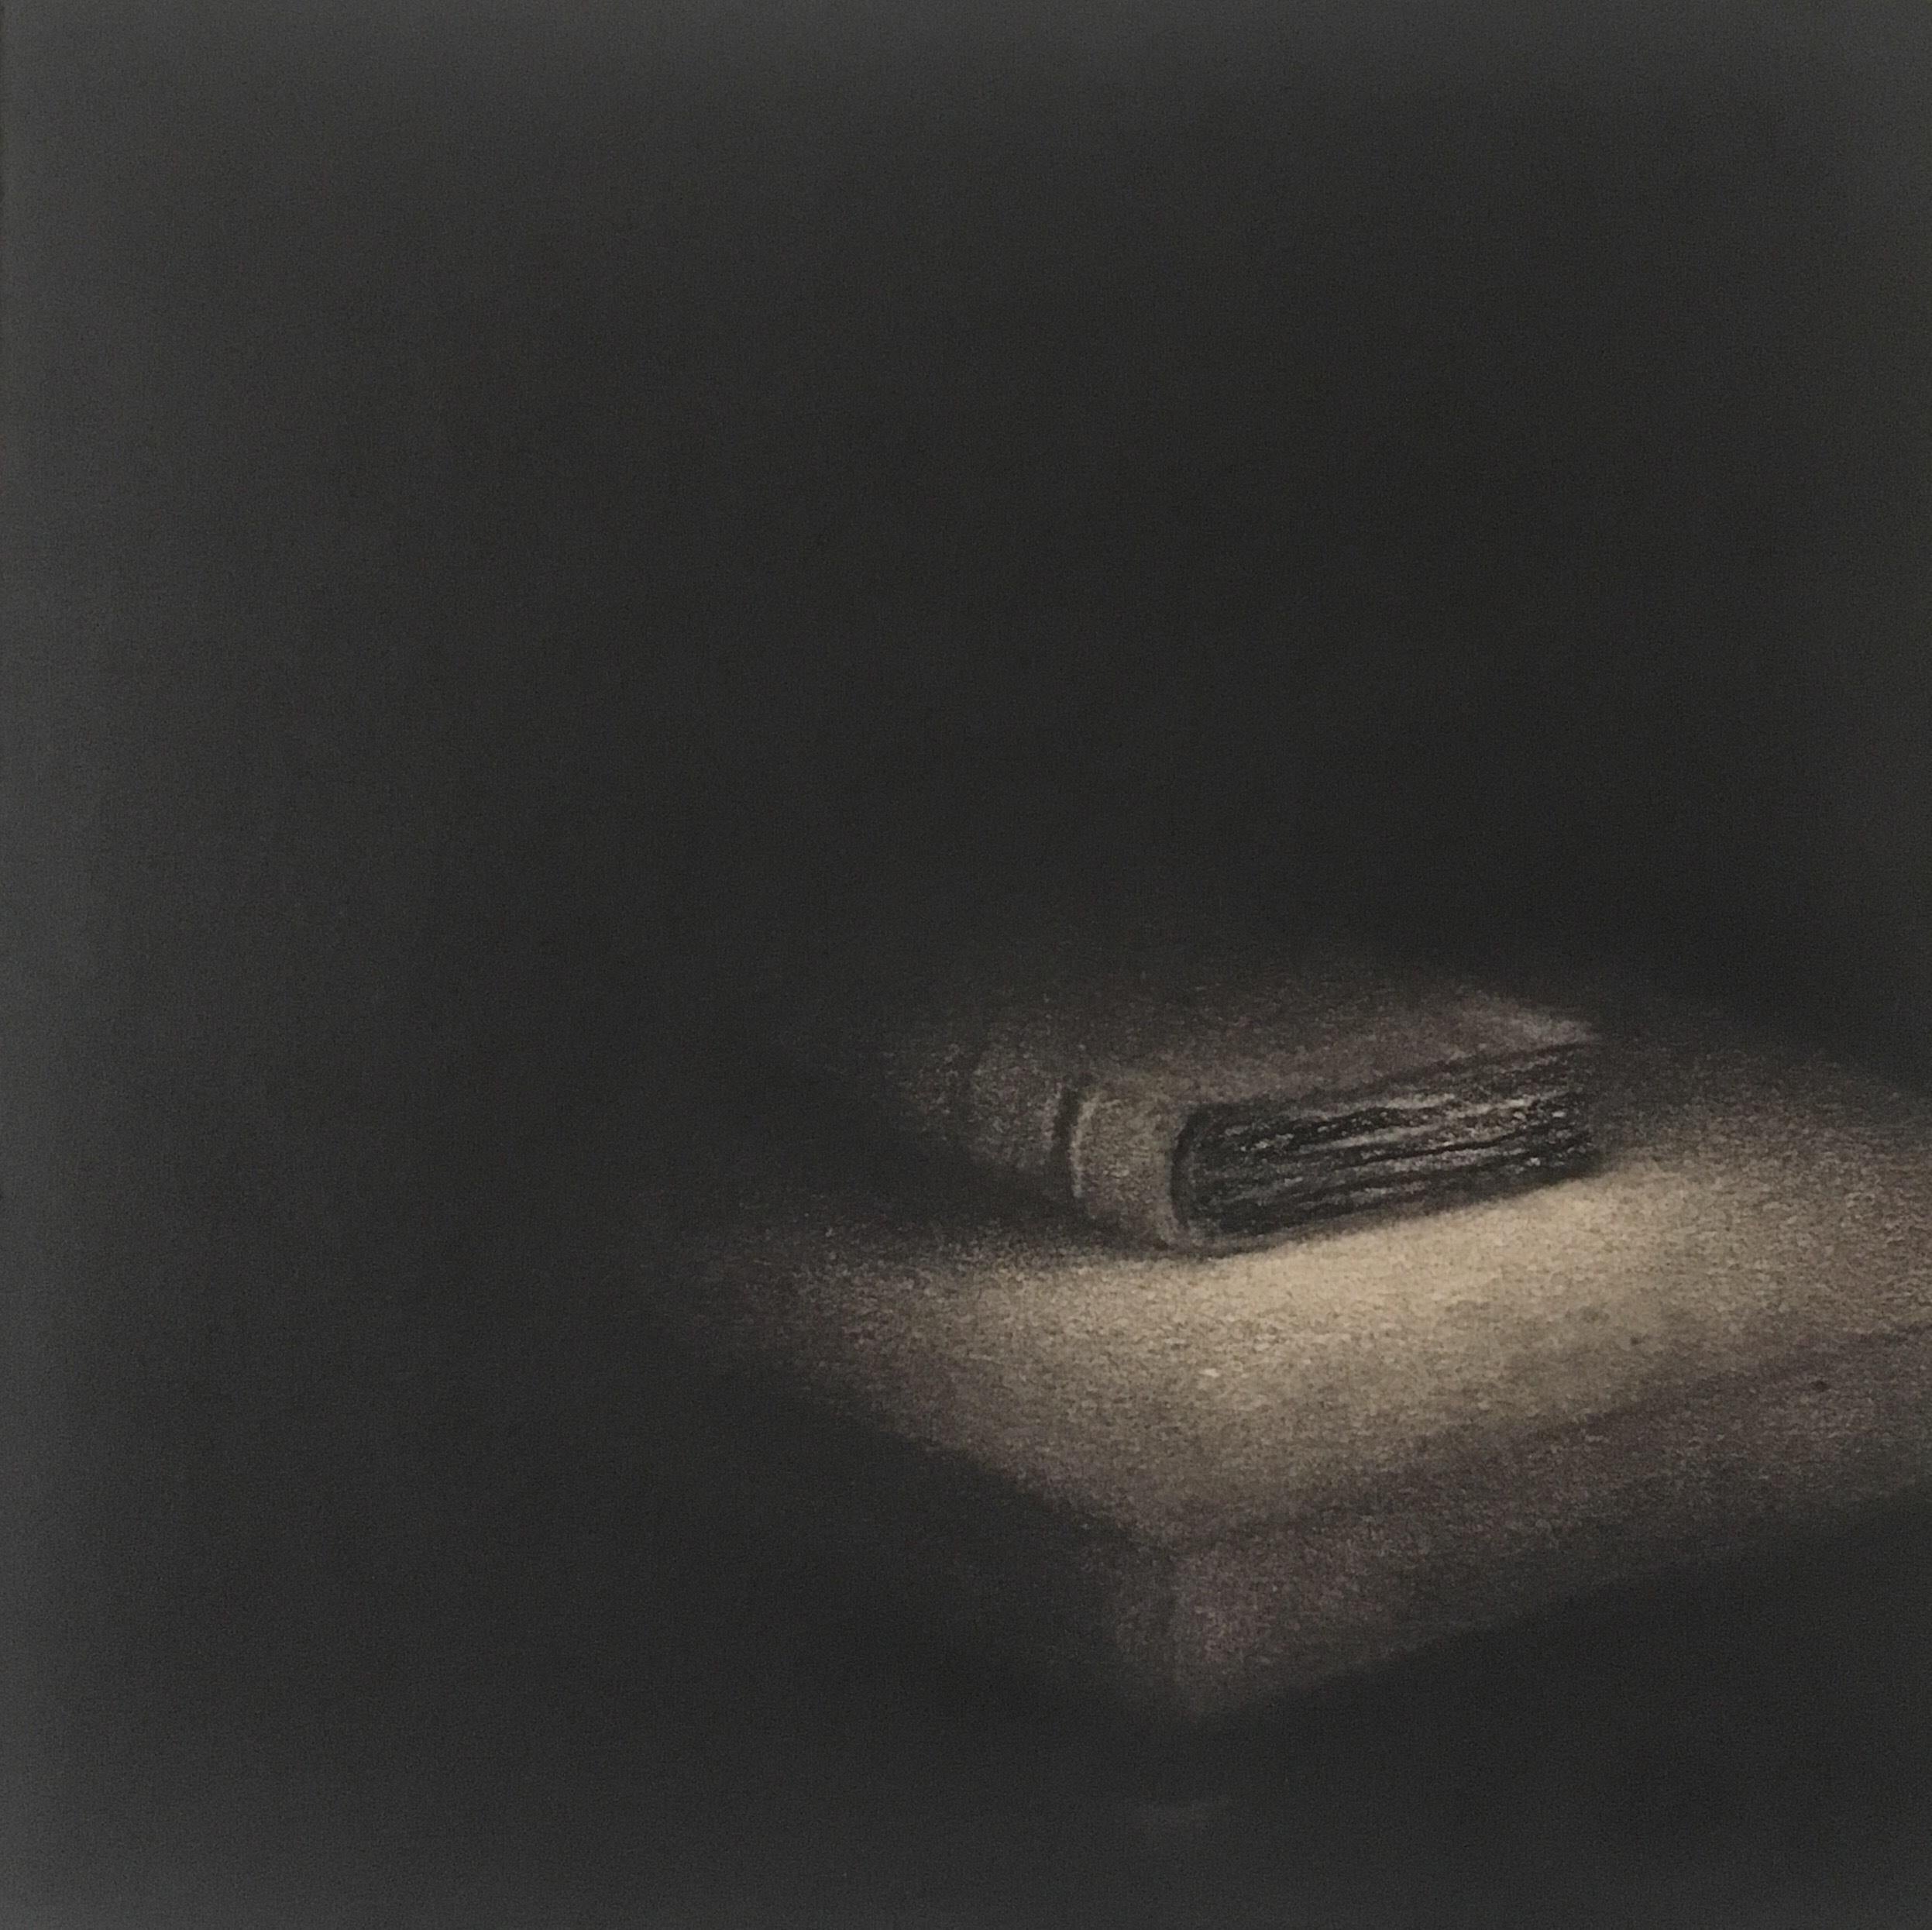 Livre
2019
charcoal on paper marouflaged on panel
20 x 20 cm

About Marina Ho

Marina Ho is a French-Vietnamese artist who lives & works between Paris & la Rochelle in France. 

Born in 1979, she decided to devote her time for painting at the age of